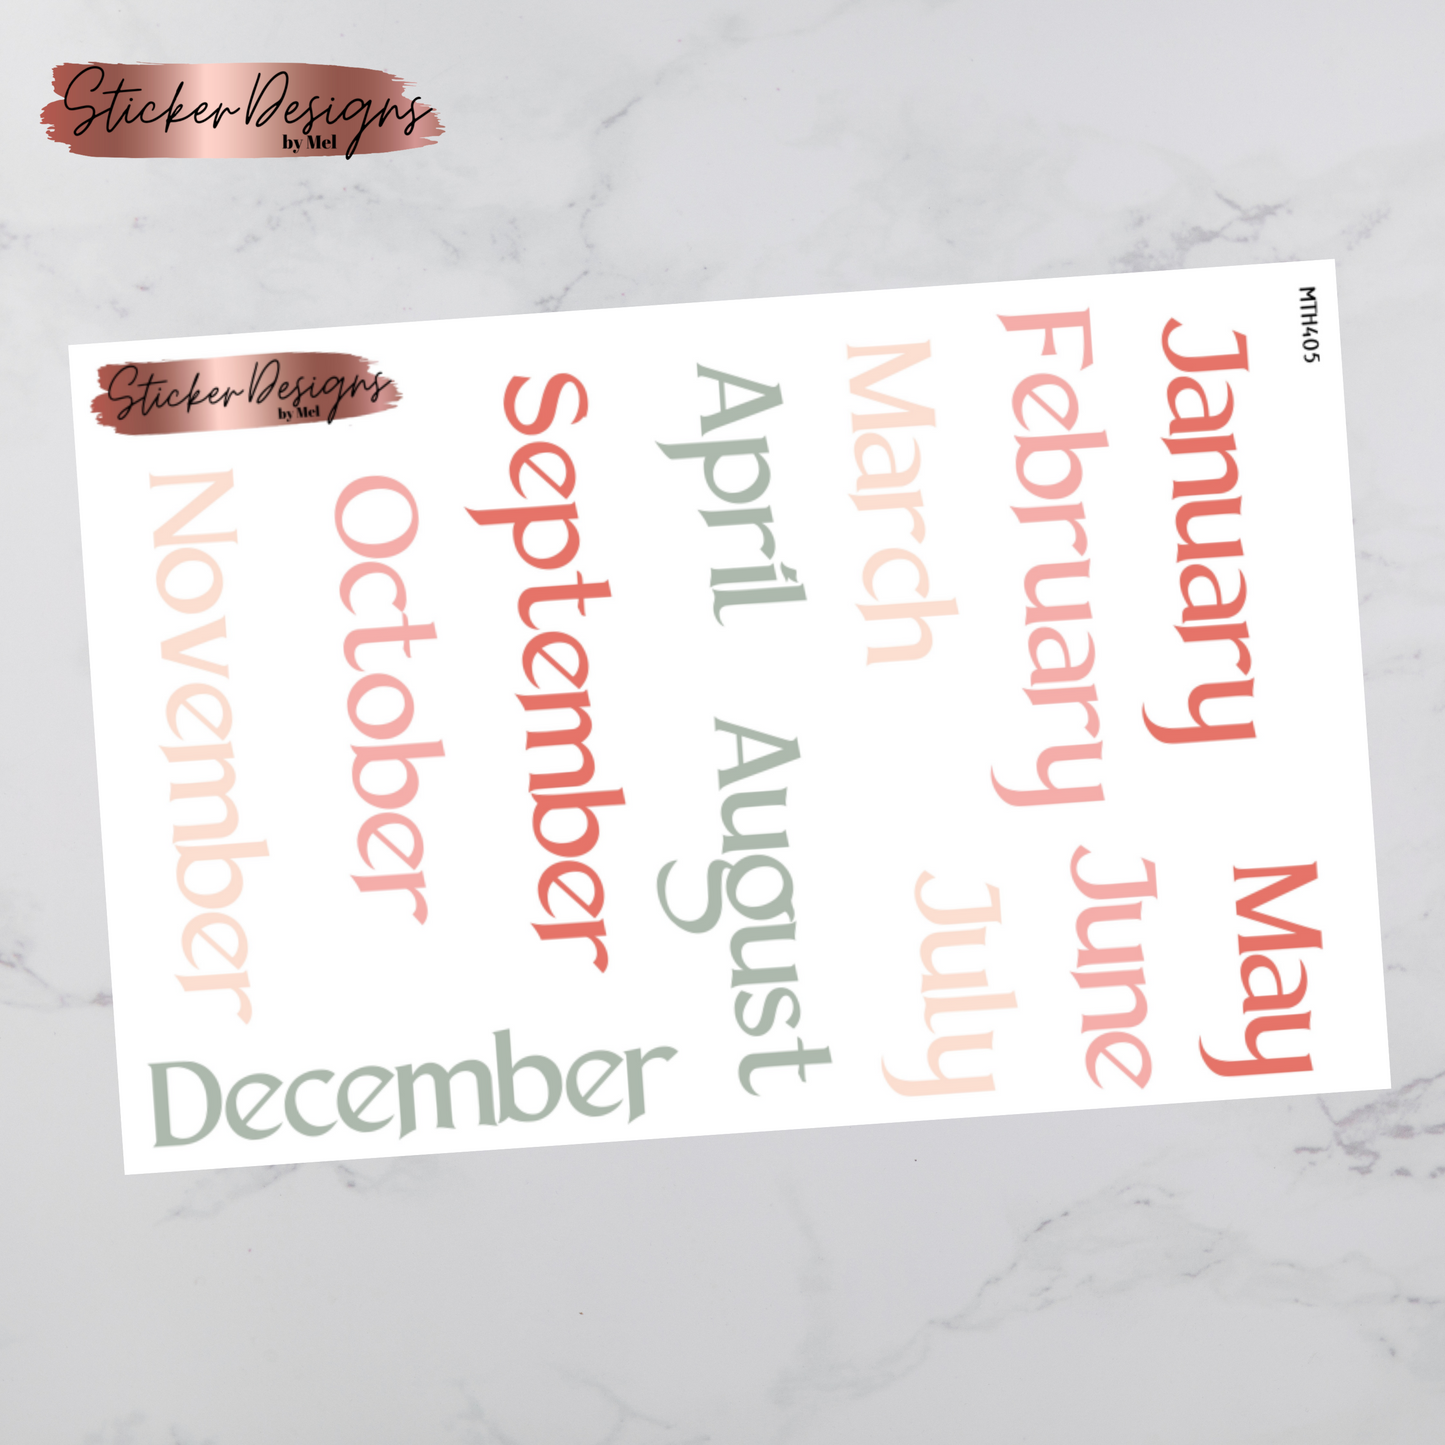 MTH 405 - Classic Happy Planner Monthly